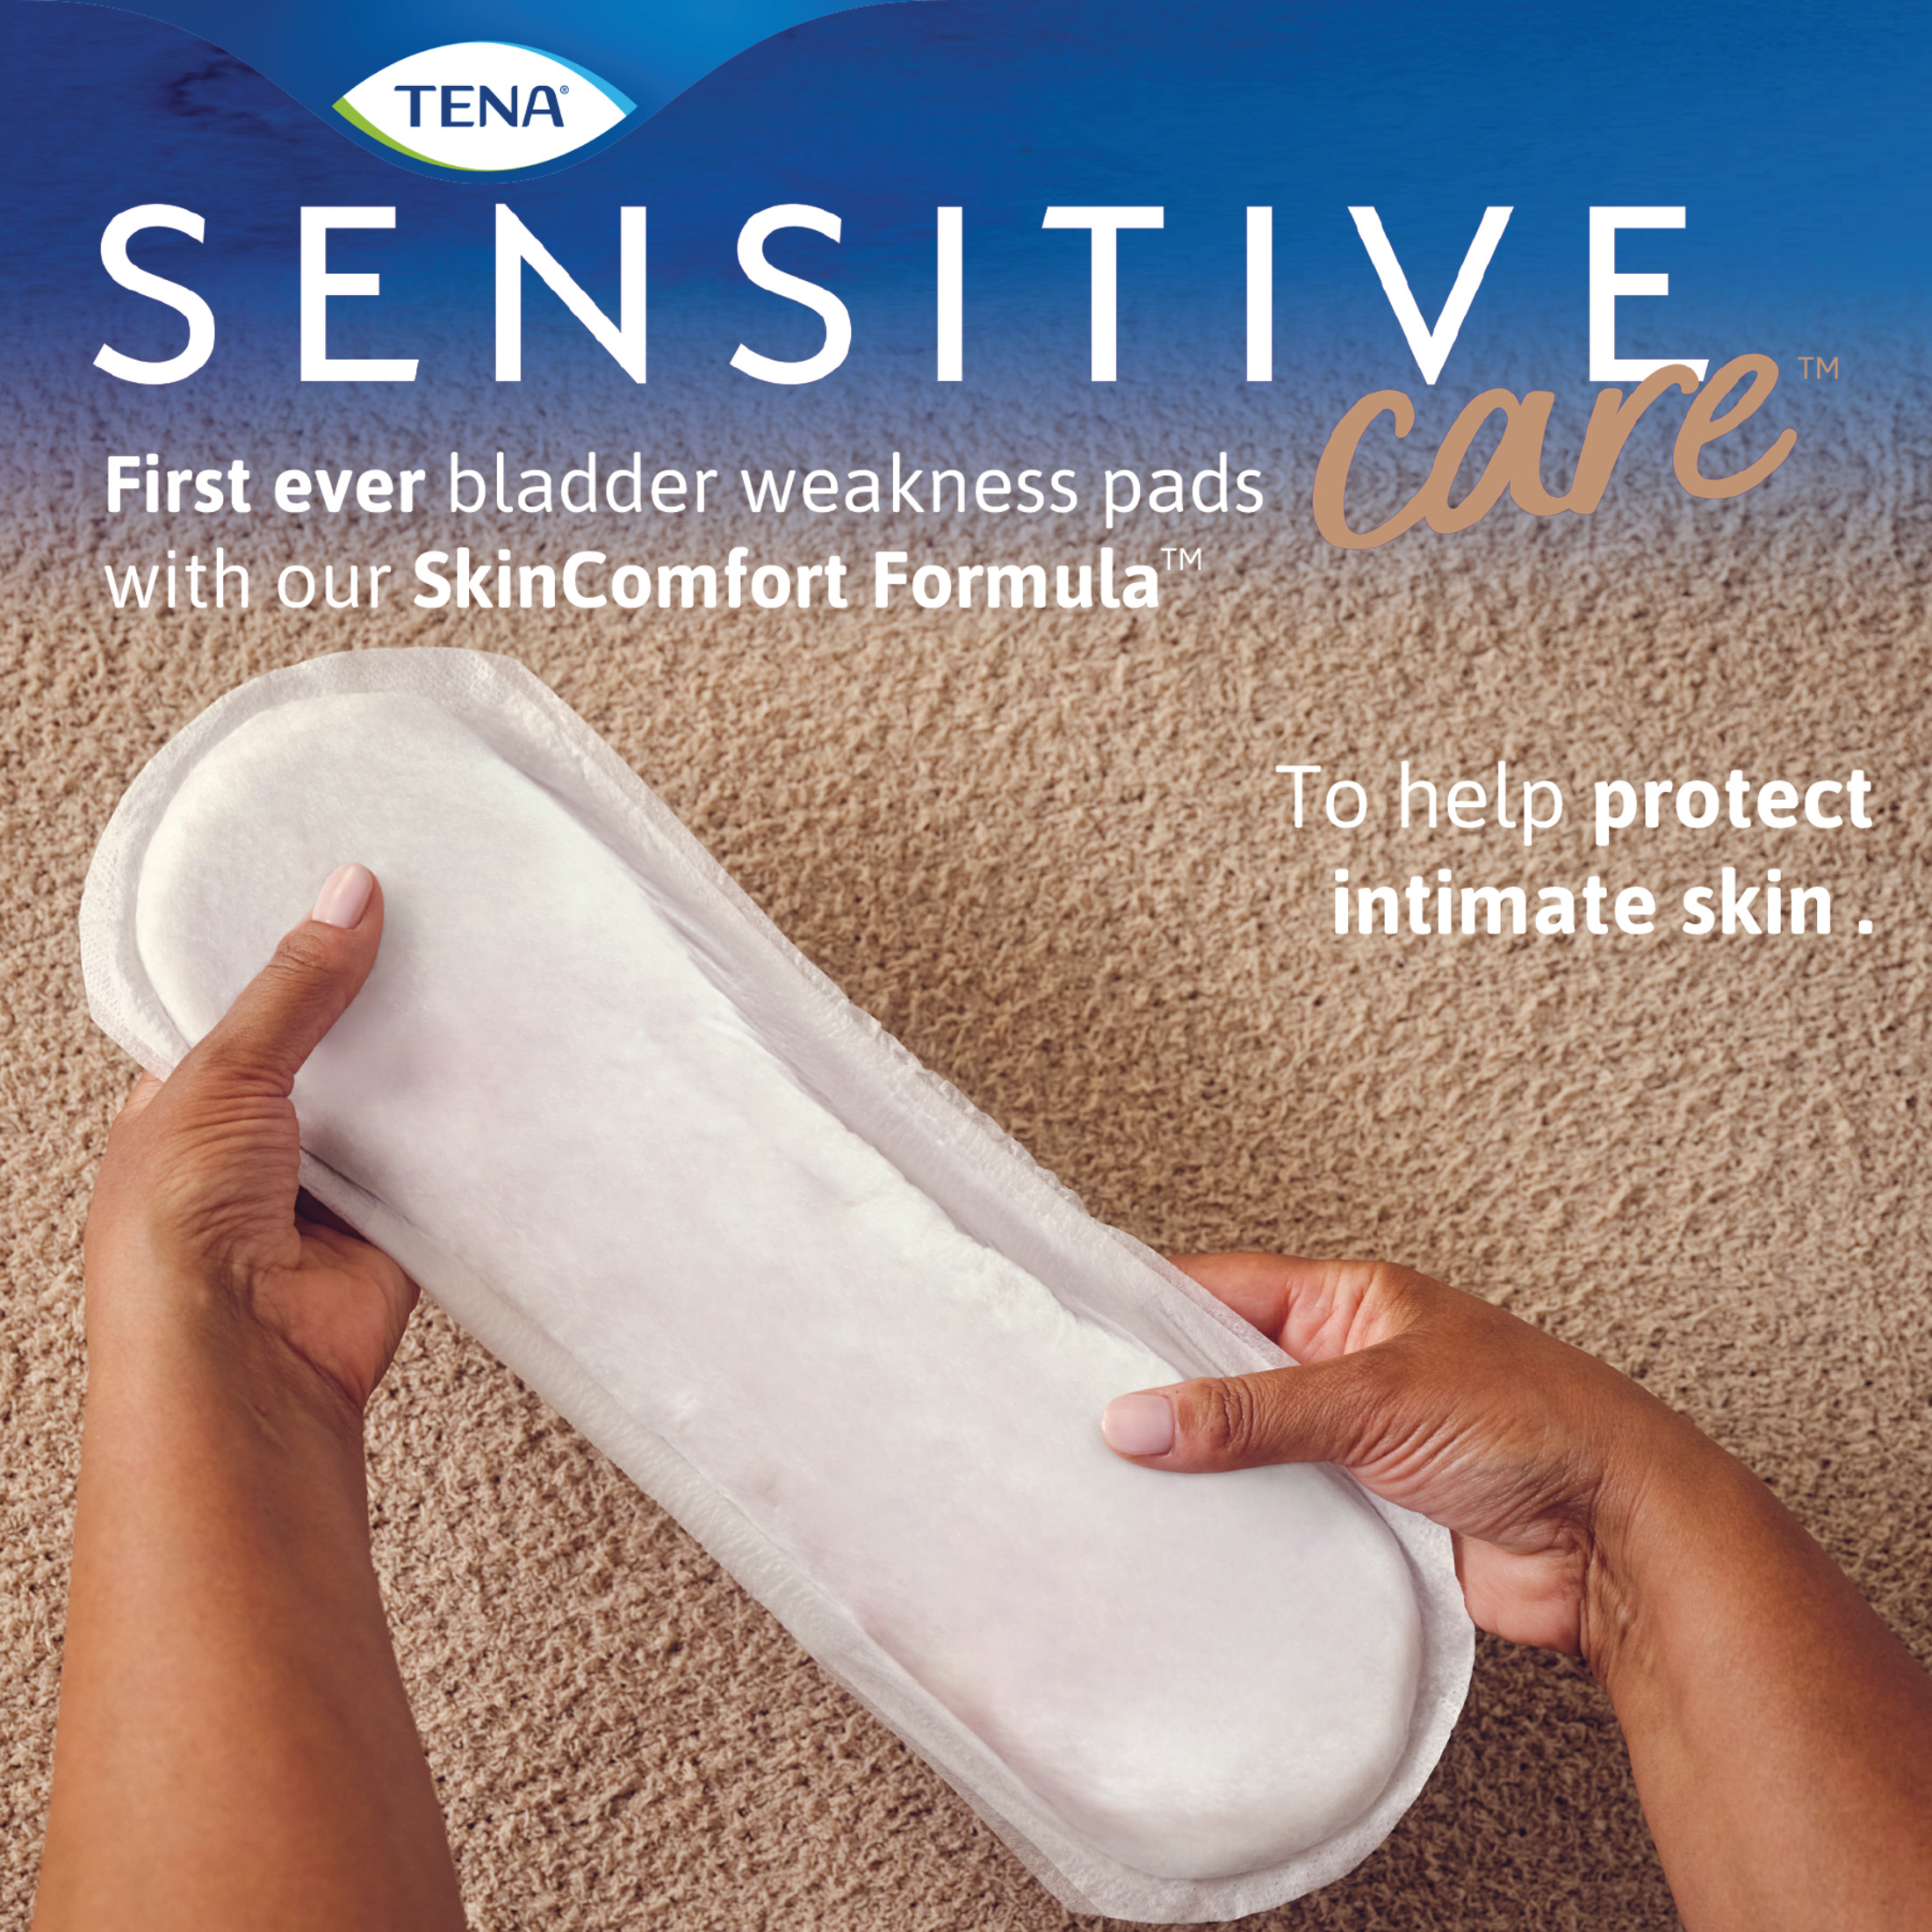 Tena Sensitive Care Ultimate Absorbency Incontinence Pad for Women, 33ct - image 3 of 6